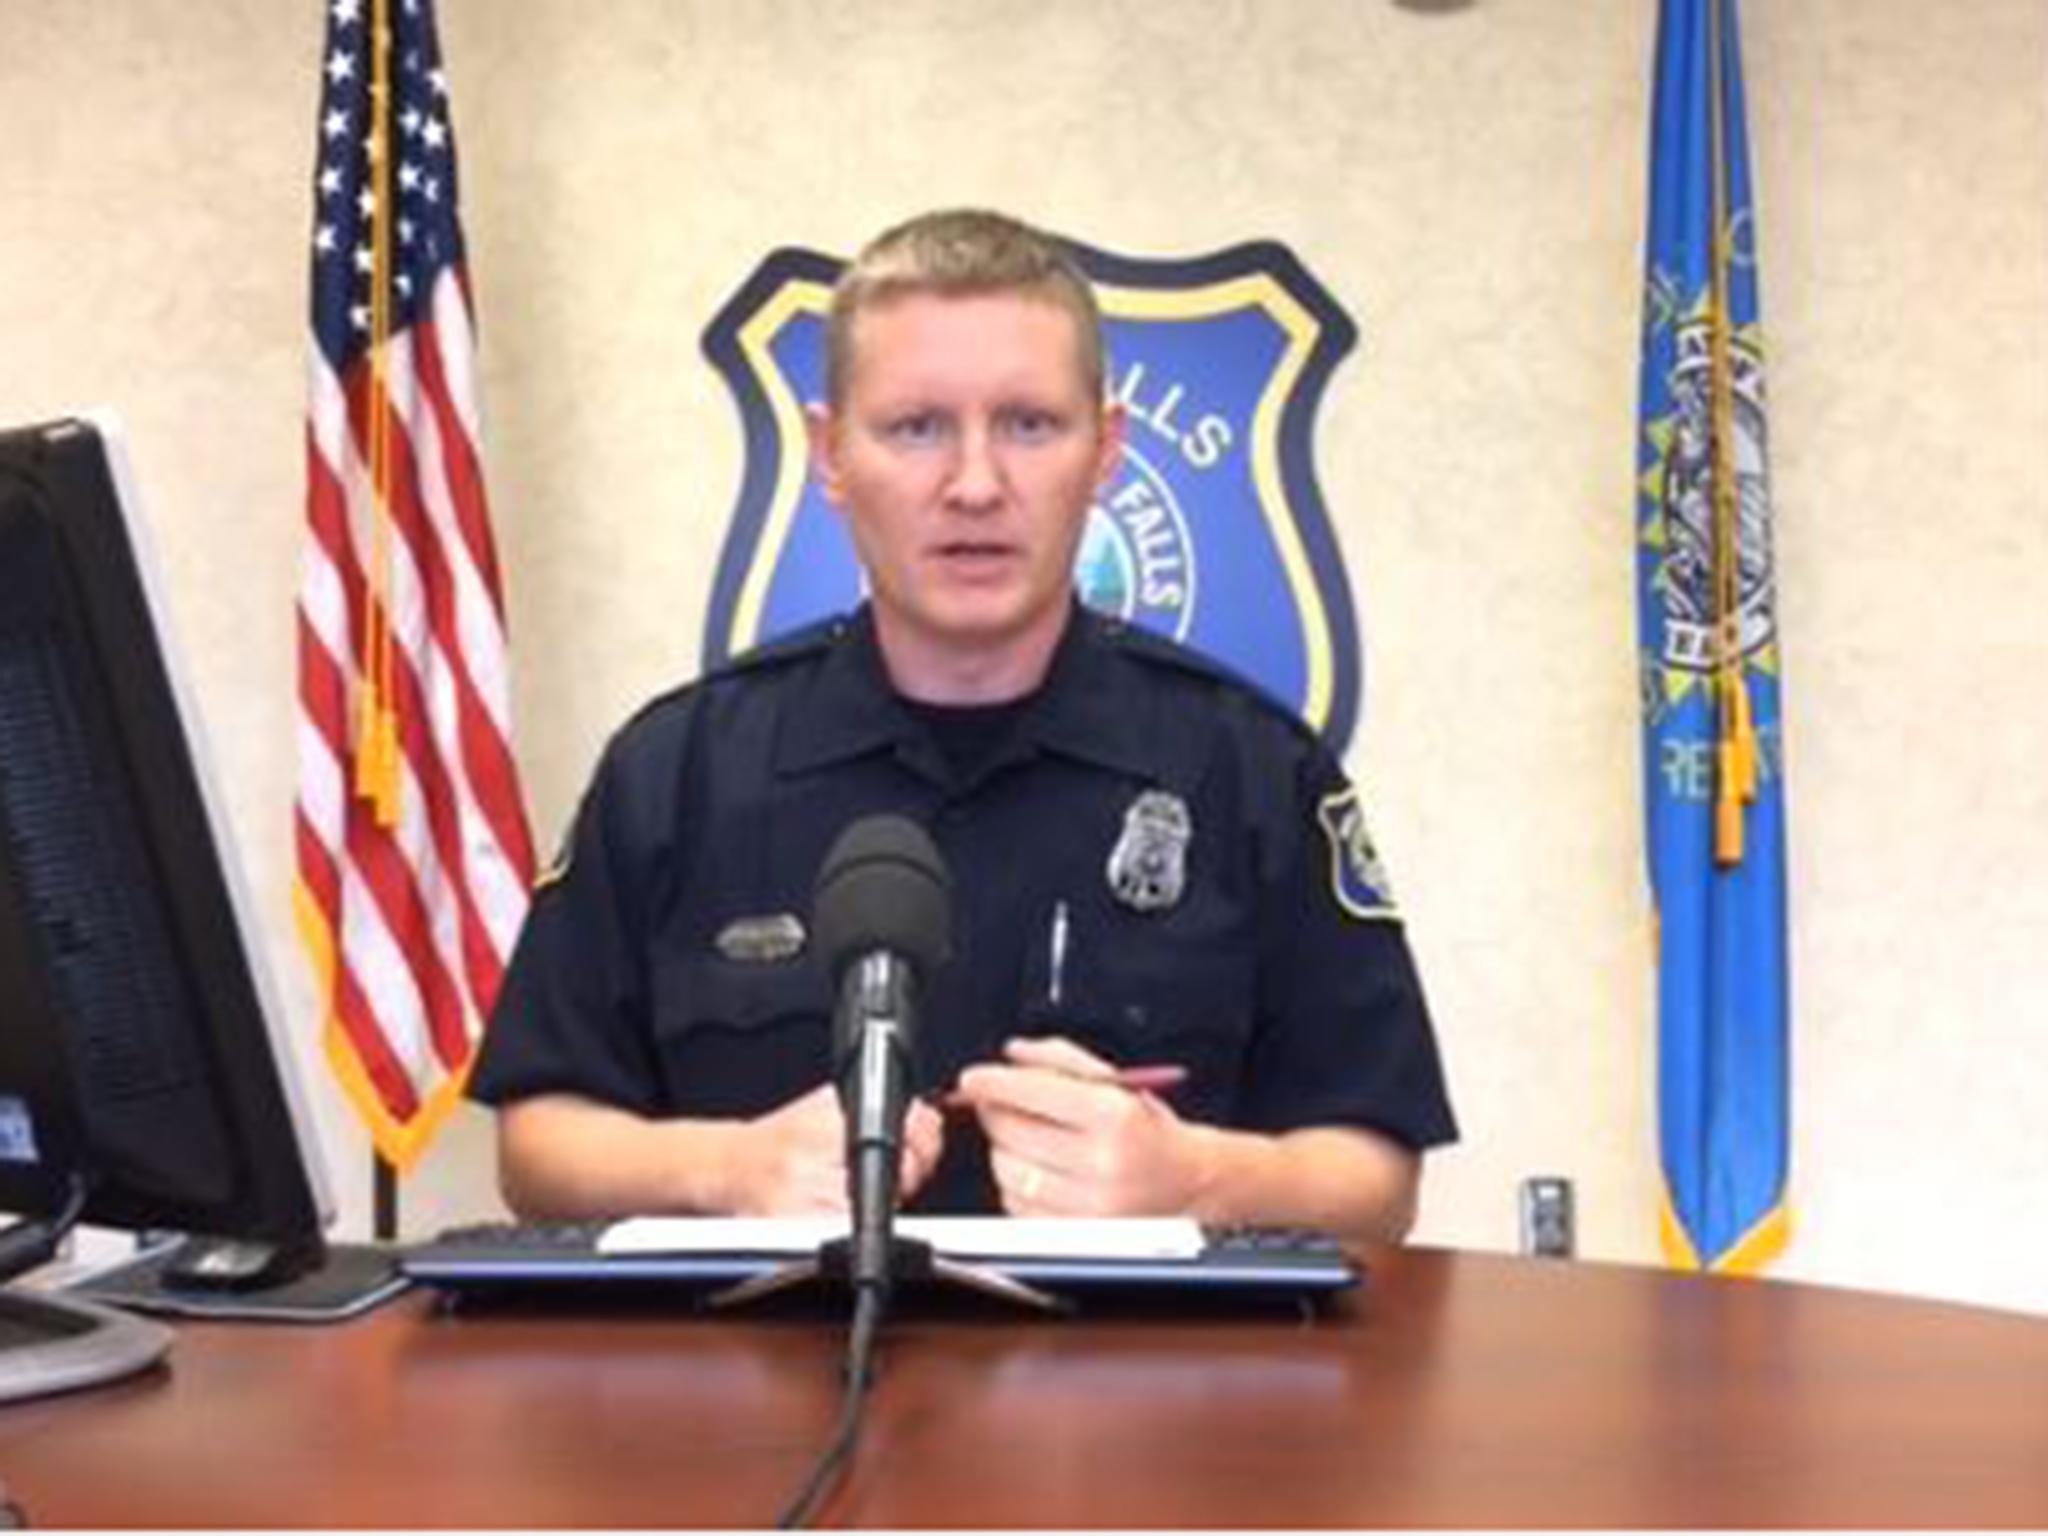 Sioux Falls Police spokesman Sam Clemens says the police department deals with domestic abuse cases on a daily basis